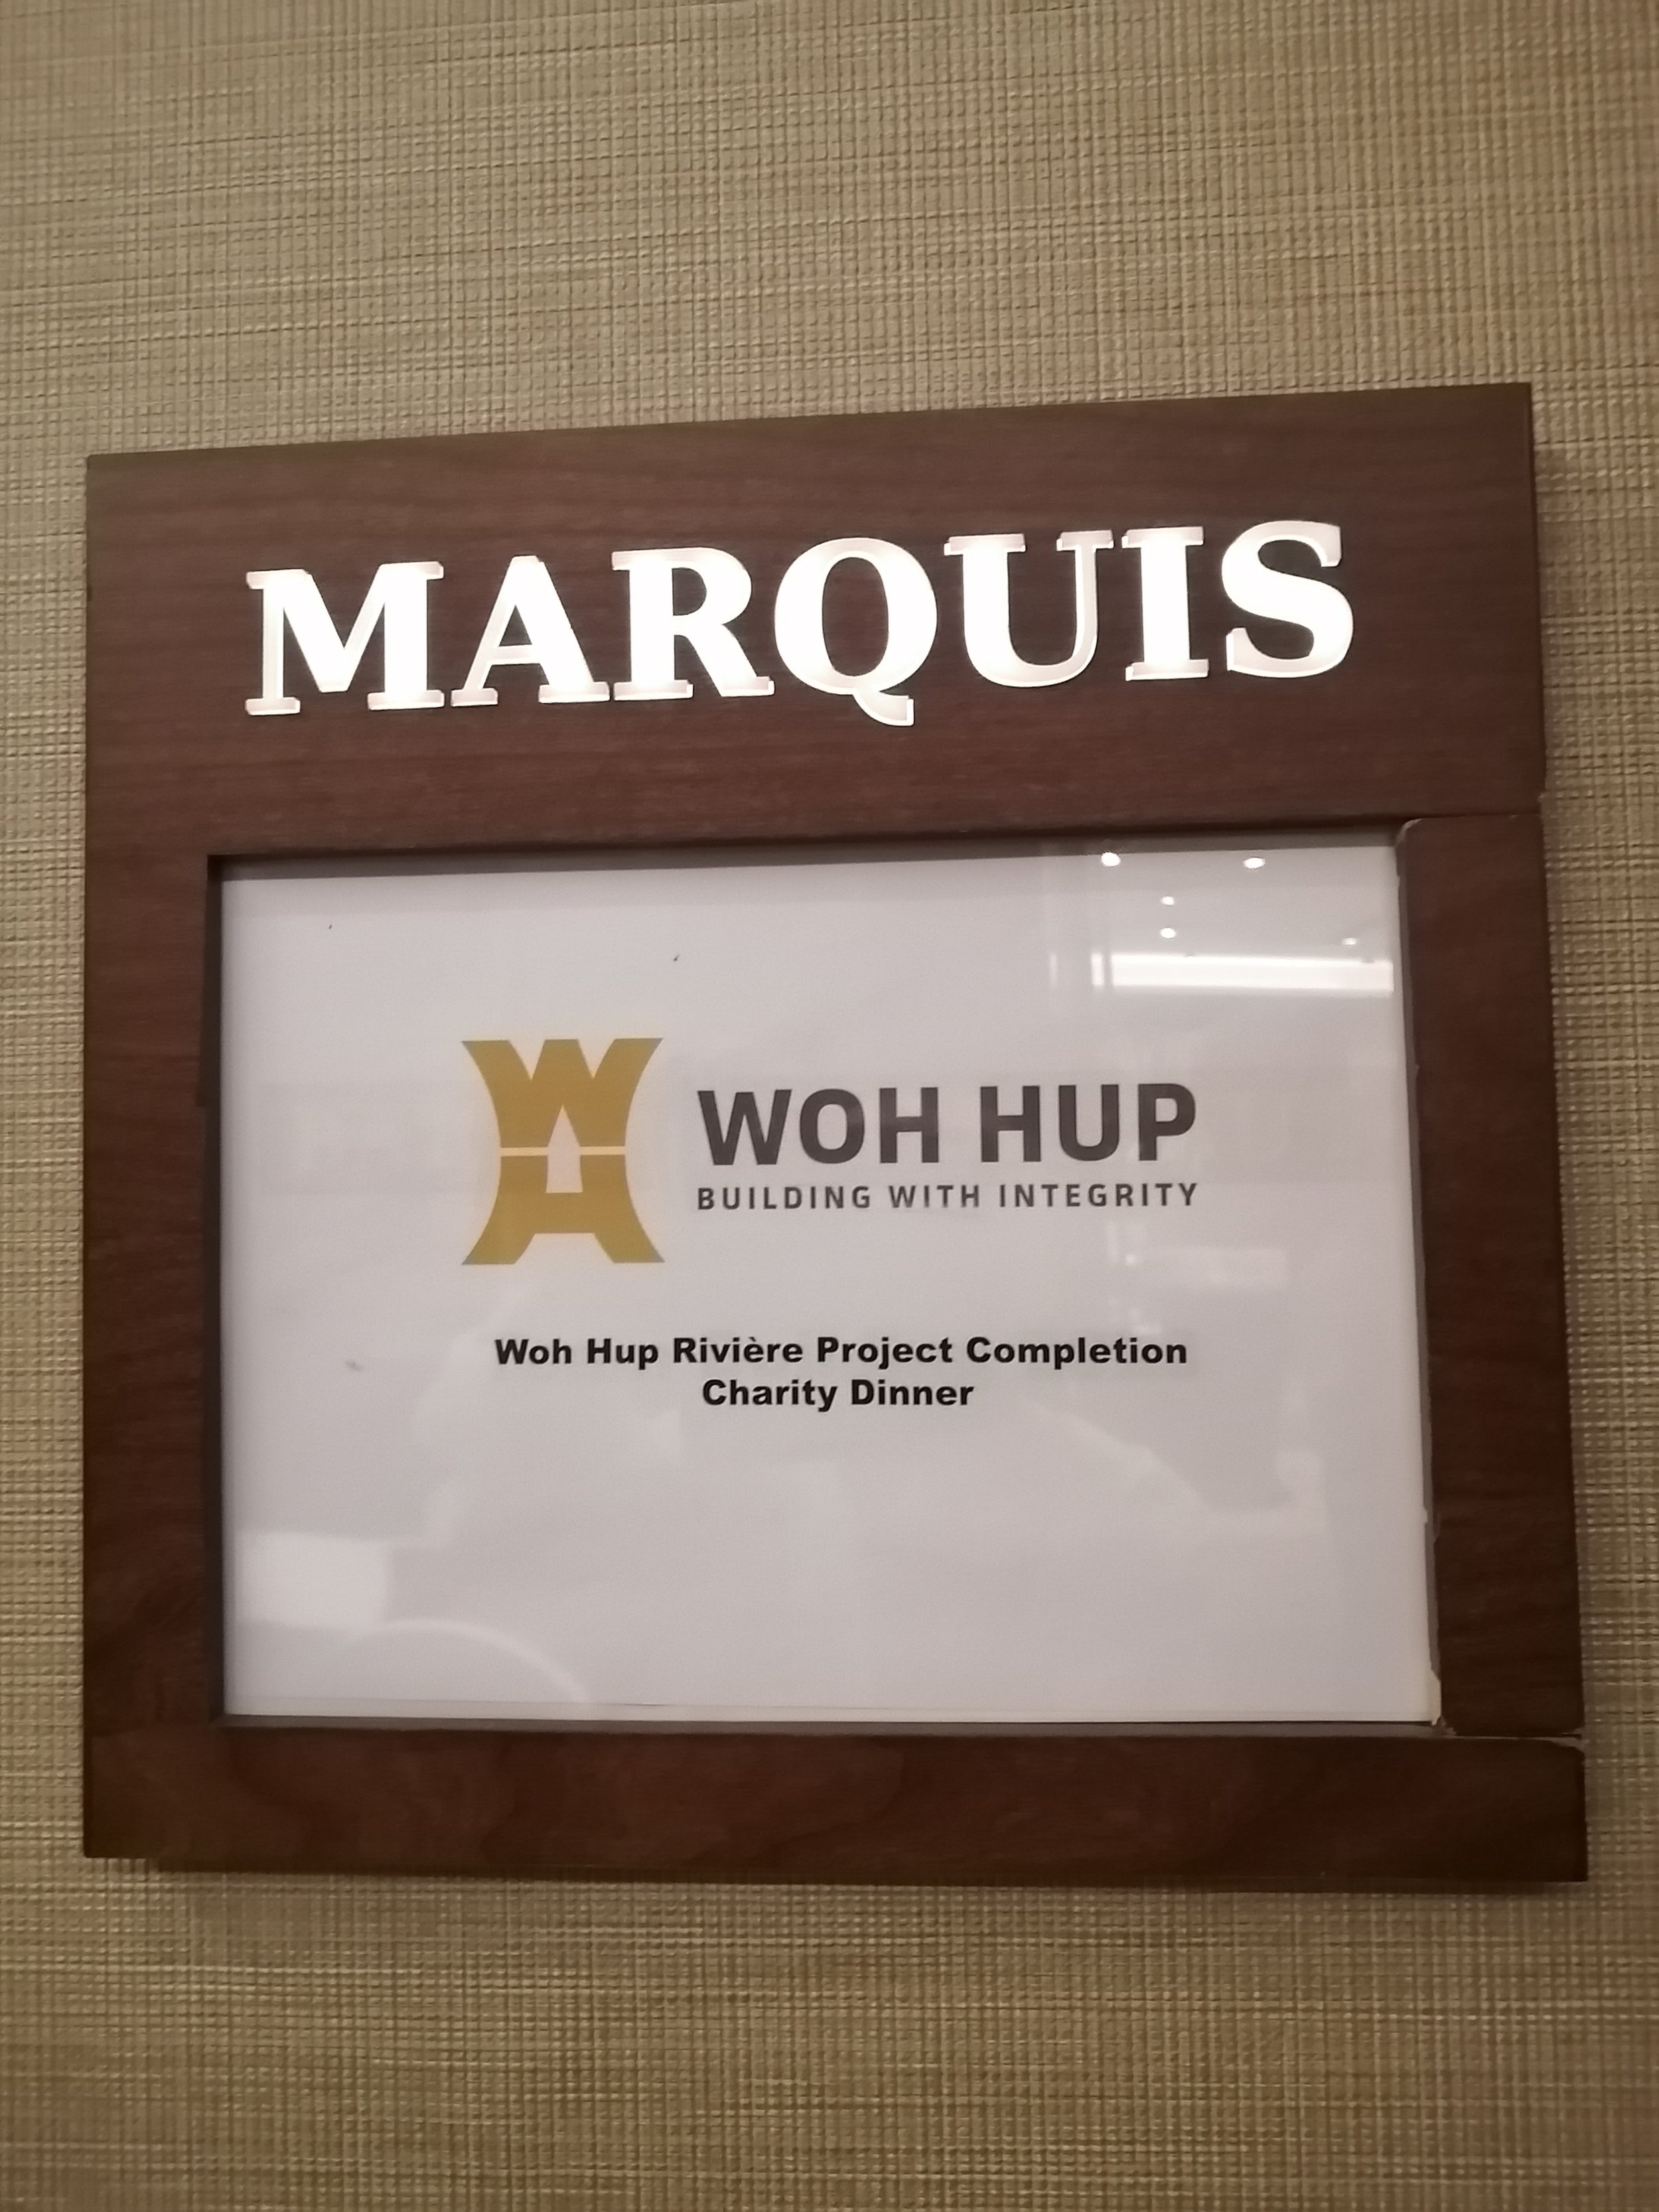 Woh Hup Project Completion Charity Dinner (2).jpg